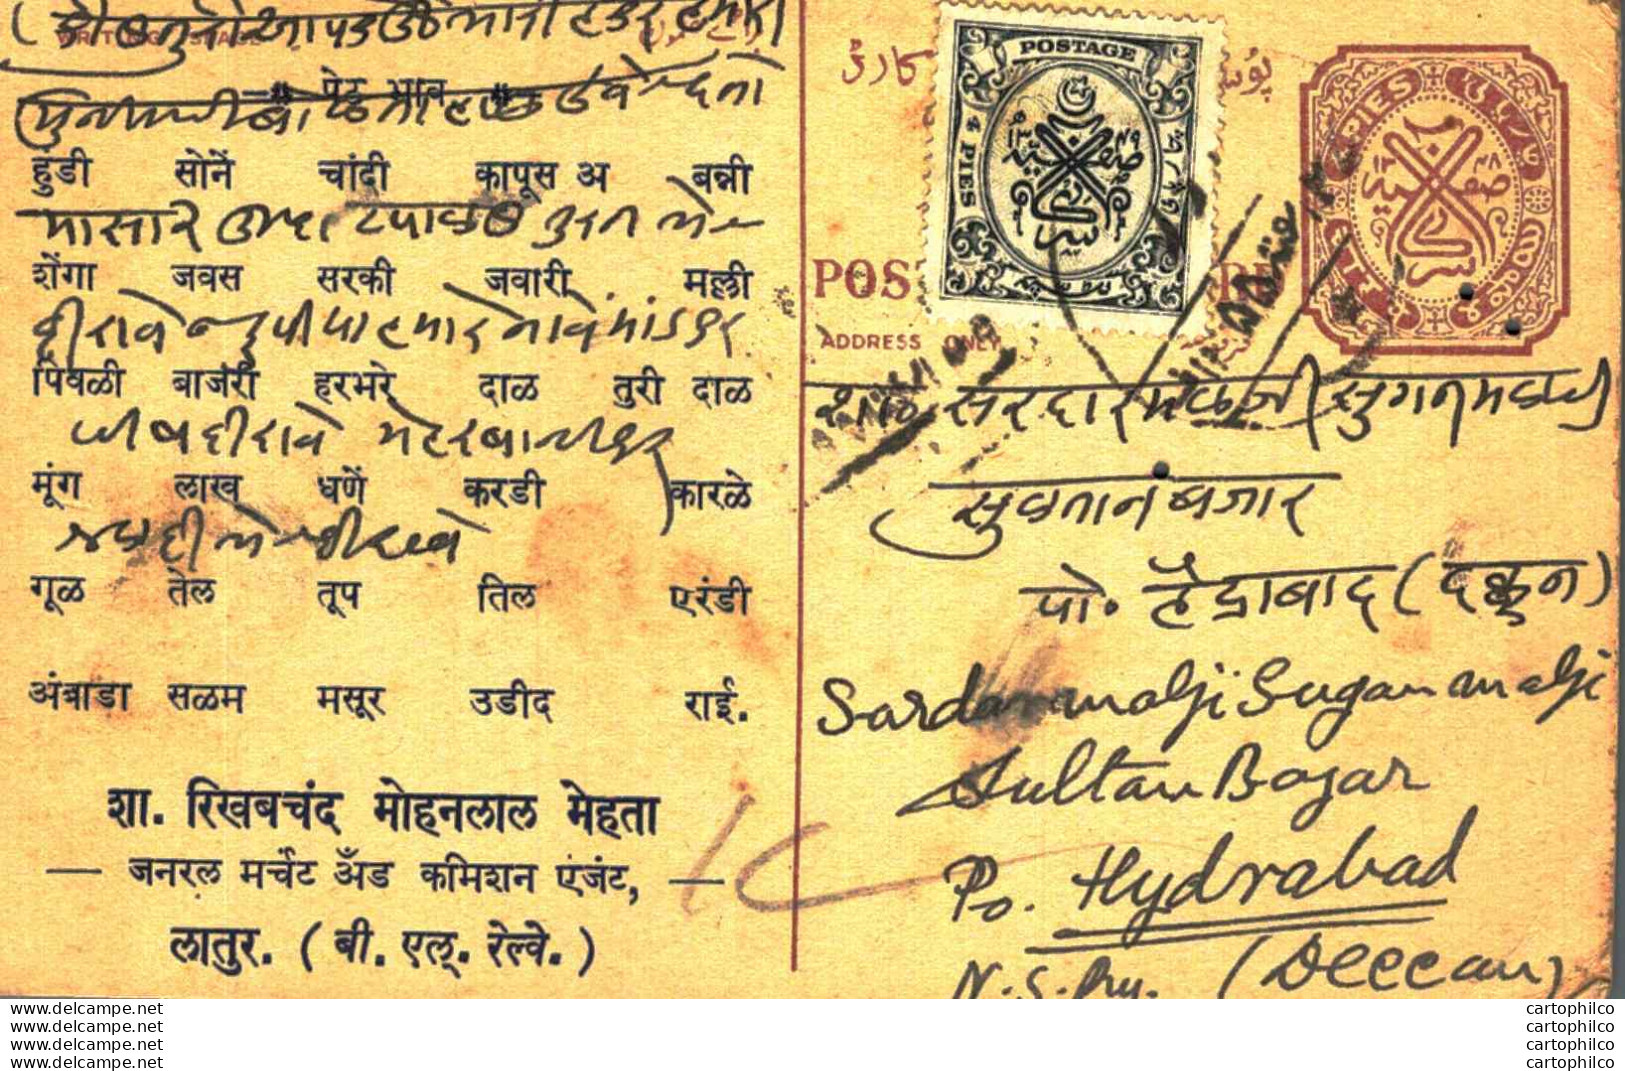 '"''India Postal Stationery Arms 4p Arms Nizam''''s Dominions To Hydrabad''"' - Ansichtskarten